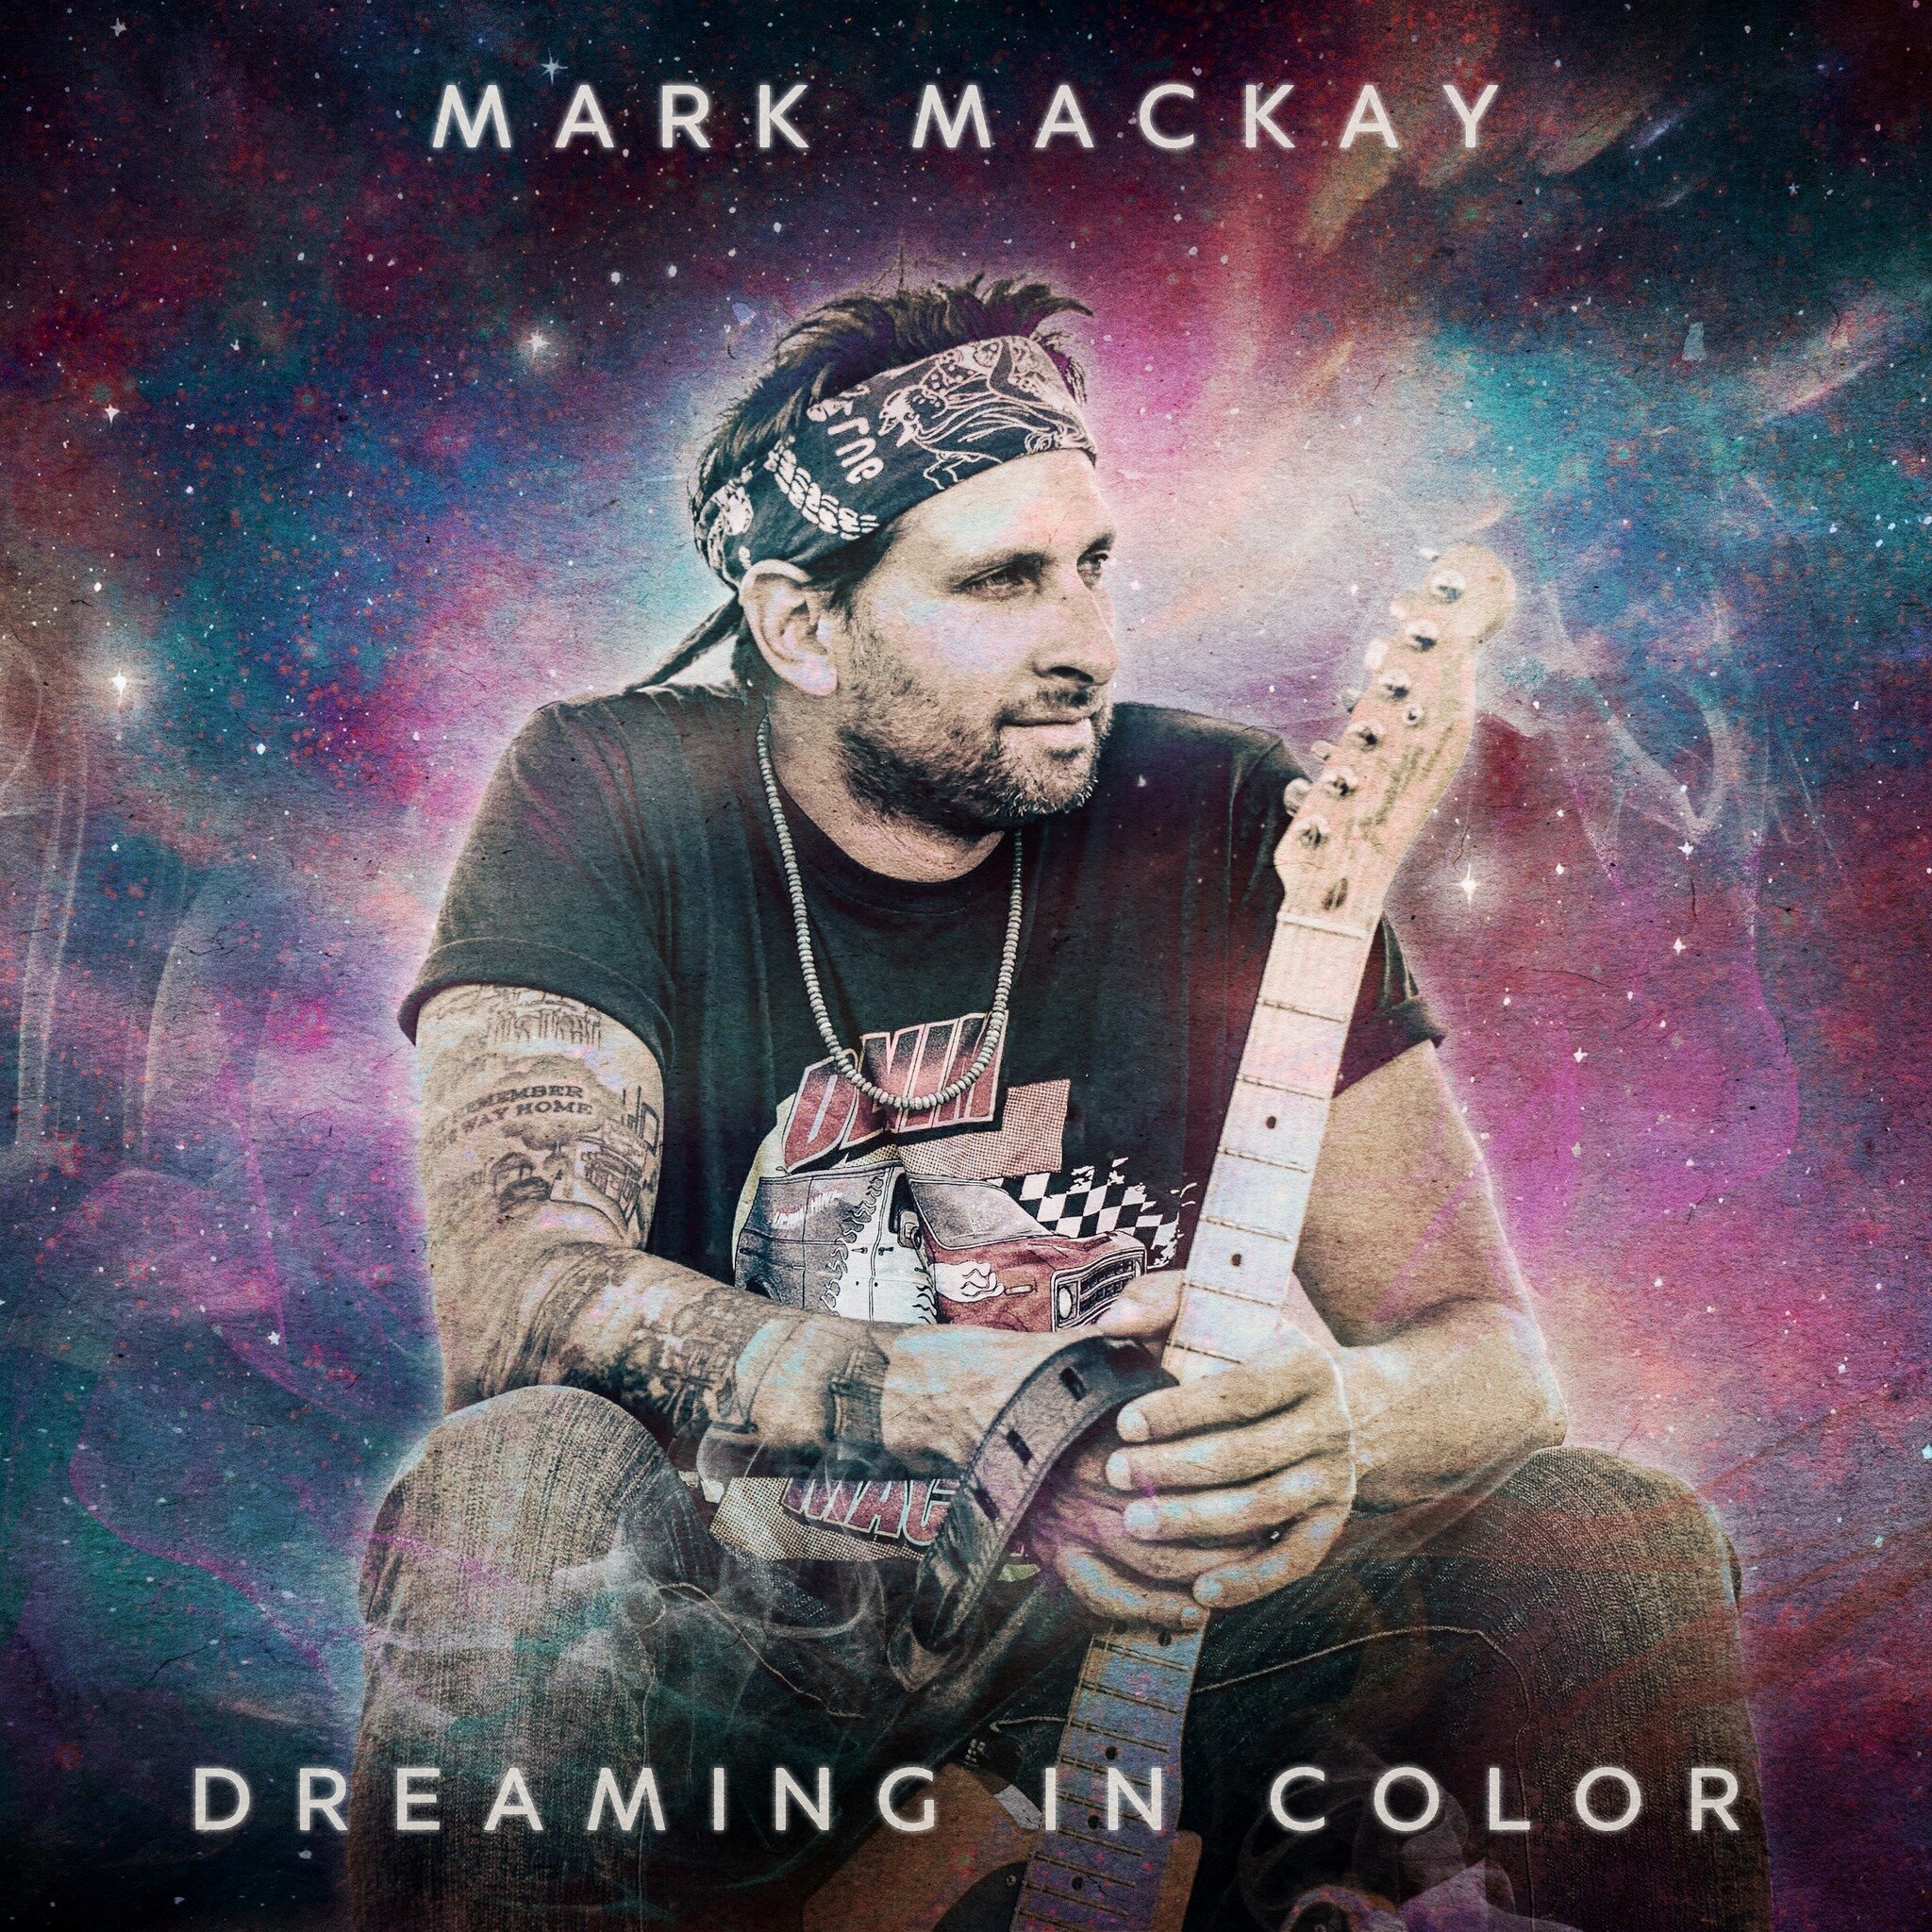 Friday 🤩 Raise you&rsquo;re had if you&rsquo;re ready for new music 🙋🏻&zwj;♂️

#newmusic #albumart #singleart #artwork #newsong #markmackay #countrymusic #countryrock #singersongwriter #songwriter #dreamingincolor #color #colors